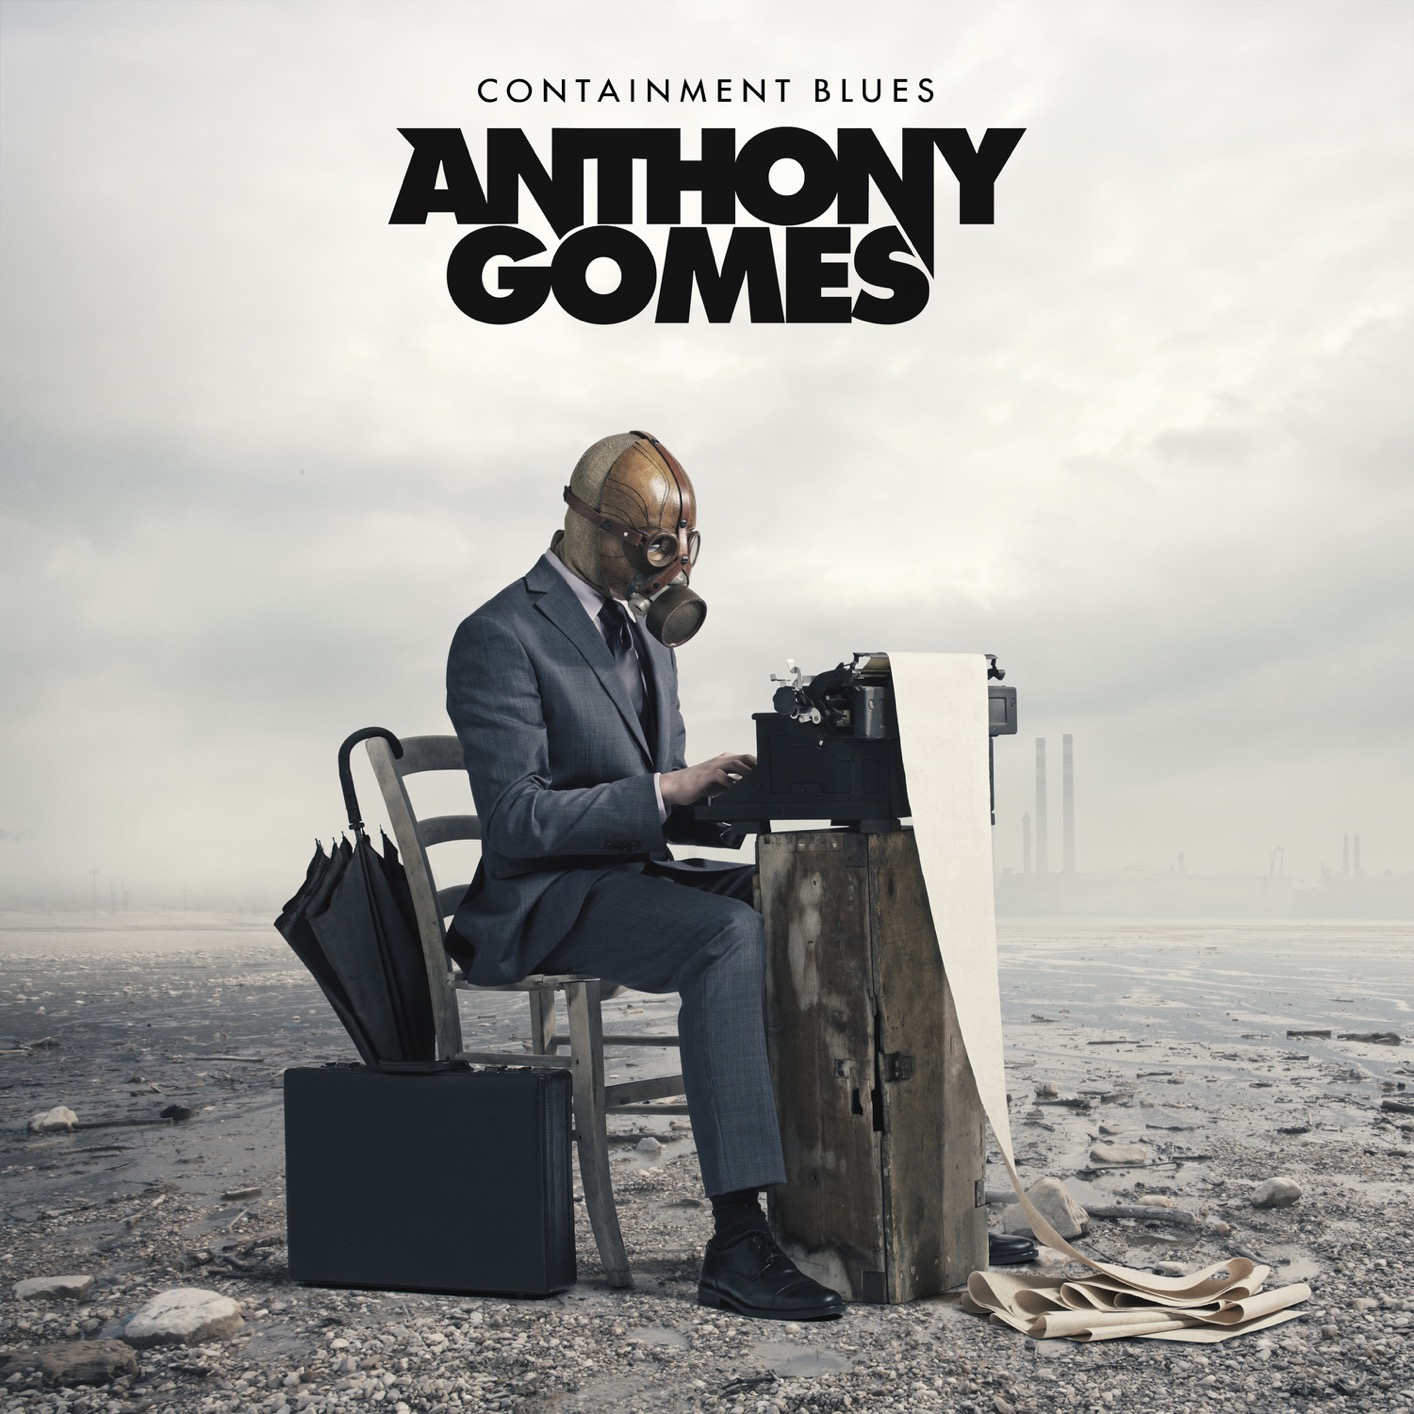 Anthony Gomes – Containment Blues (2020) [FLAC 24bit/48kHz]